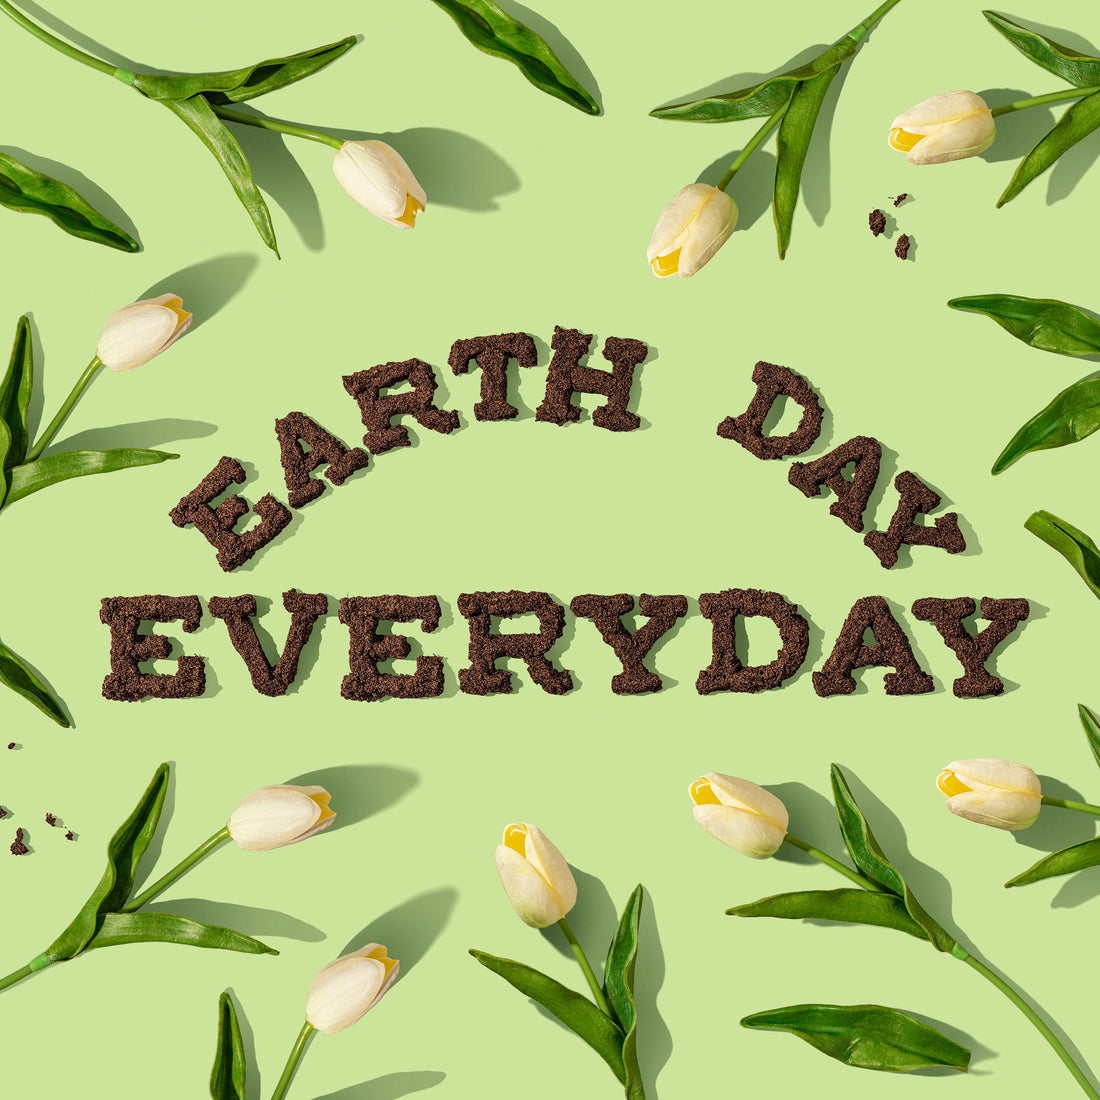 Earth Day Every Day!